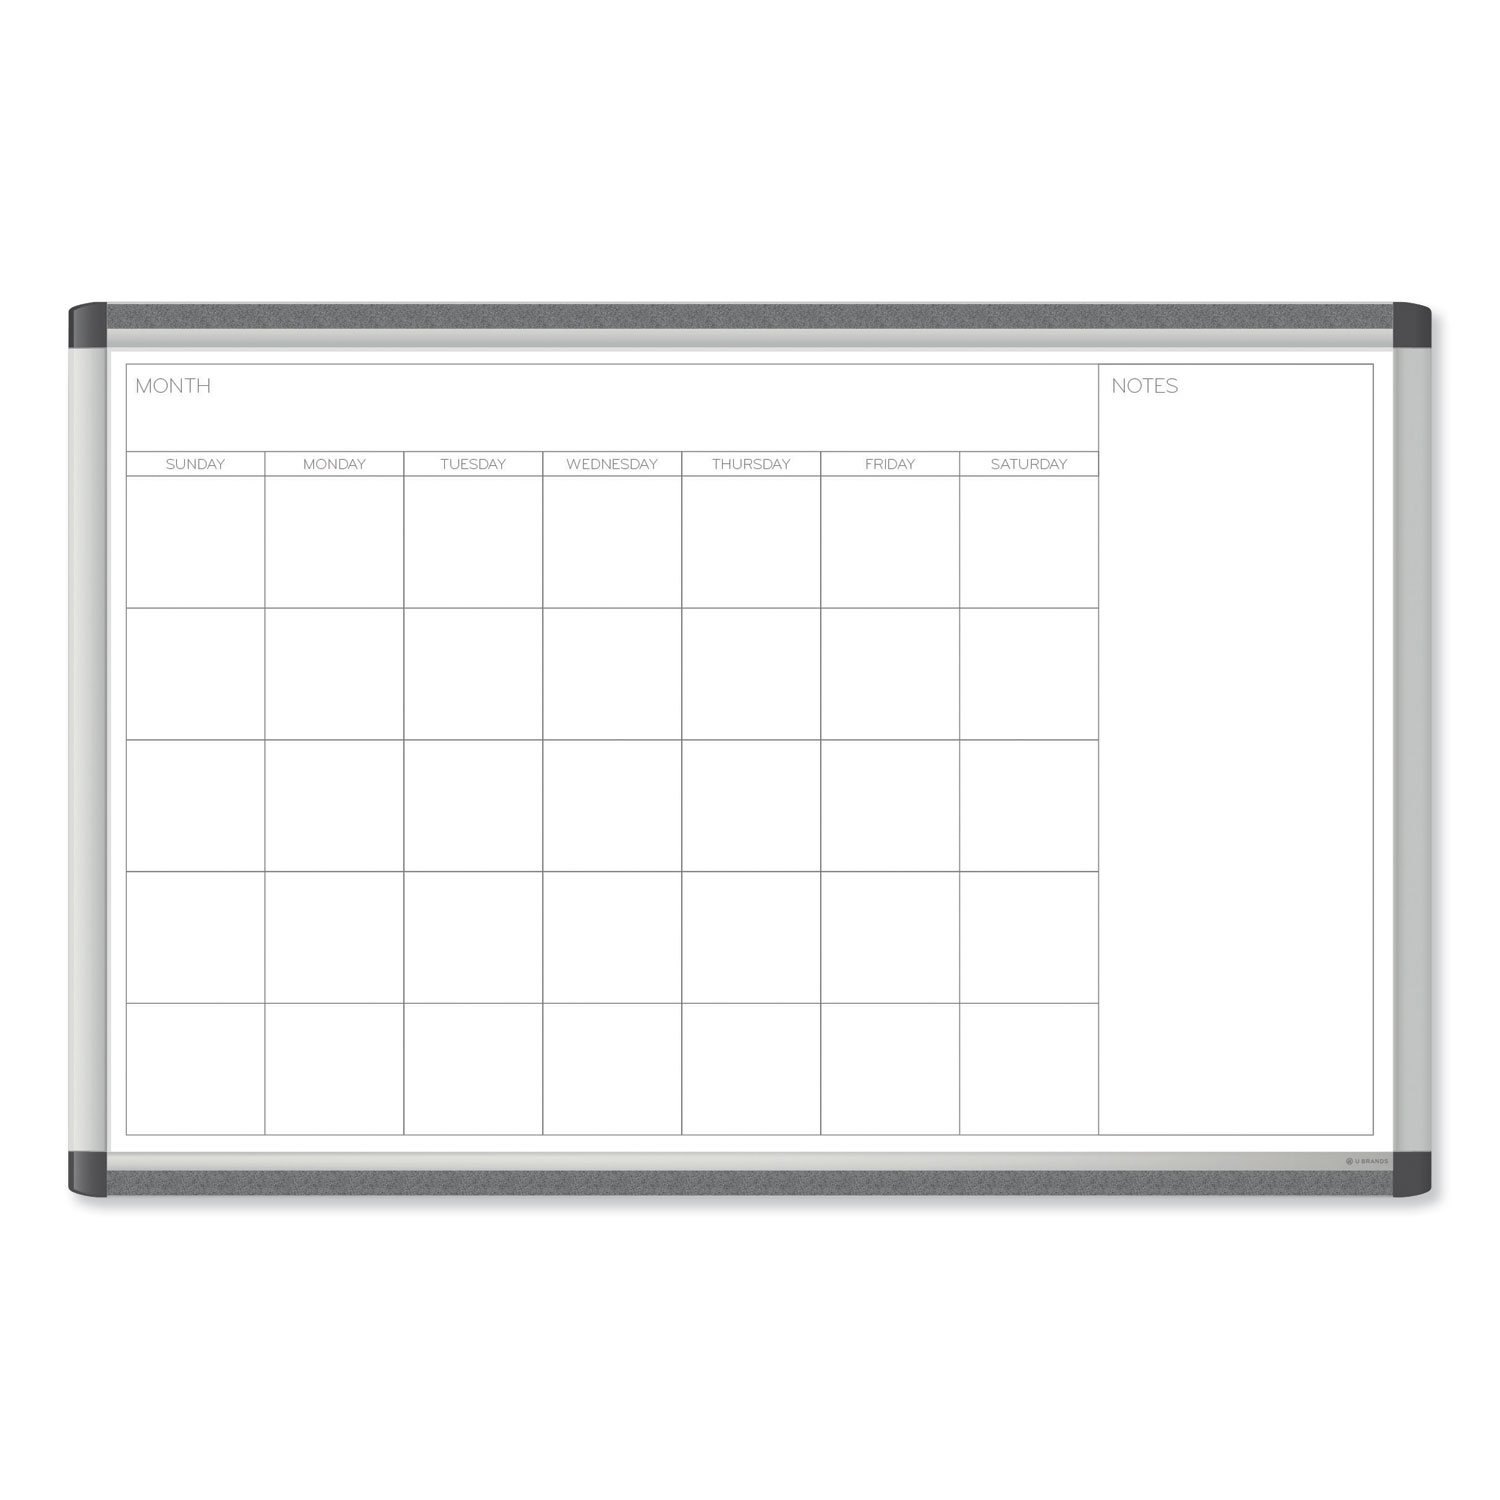 PINIT Magnetic Dry Erase Undated One Month, 36 x 24, White Silver Aluminum Frame -